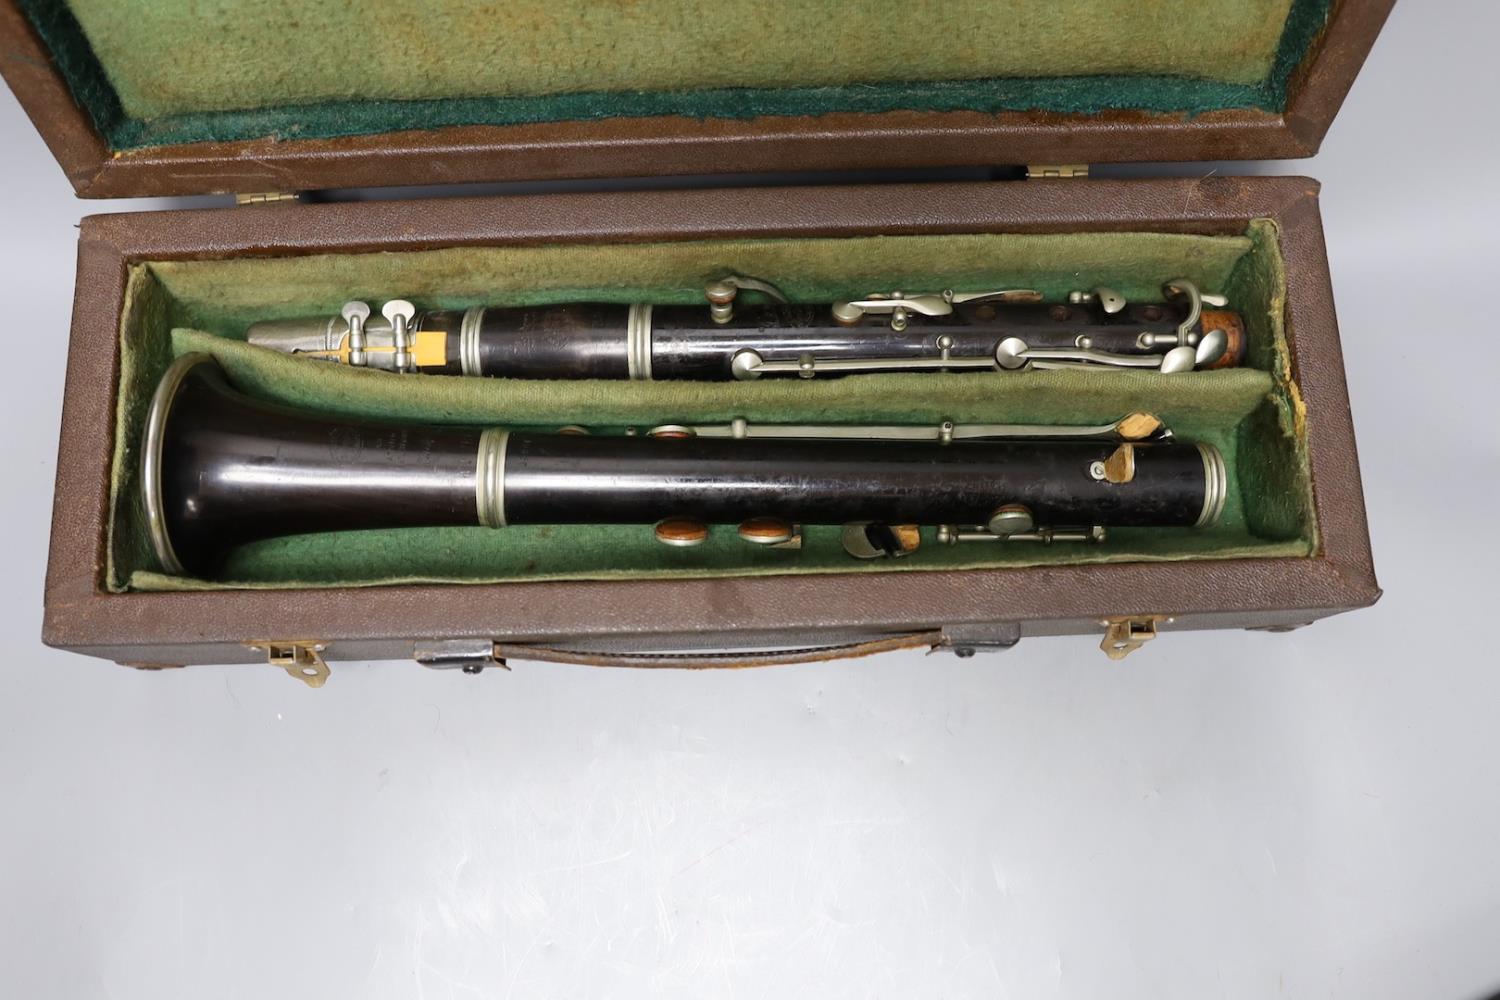 A ‘Superior Class’ Hawkes & Son clarinet and a cased Rampone and Cazzani ‘Judson’ ’ clarinet,67 cm - Image 4 of 10